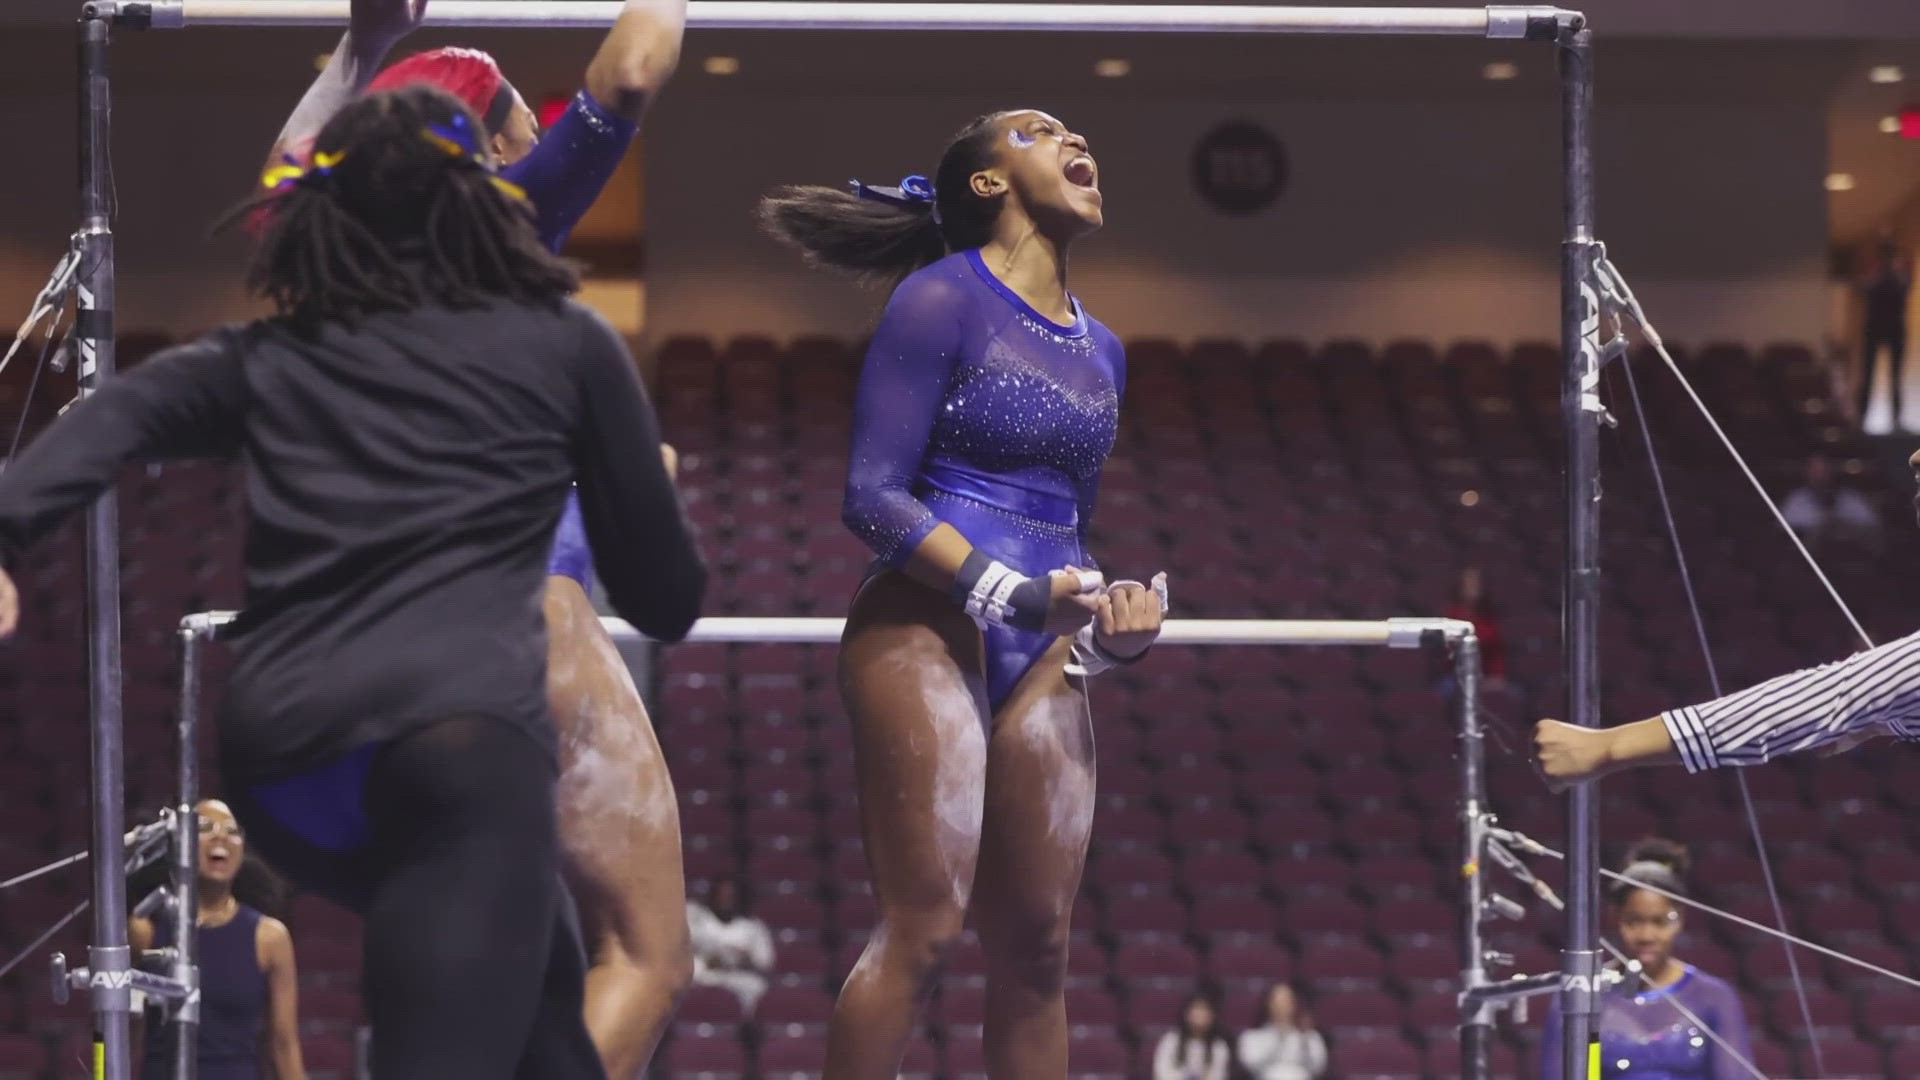 The gymnast from Fisk University has become the first thlete from a historically Black college or university to win a national collegiate gymnastics championship